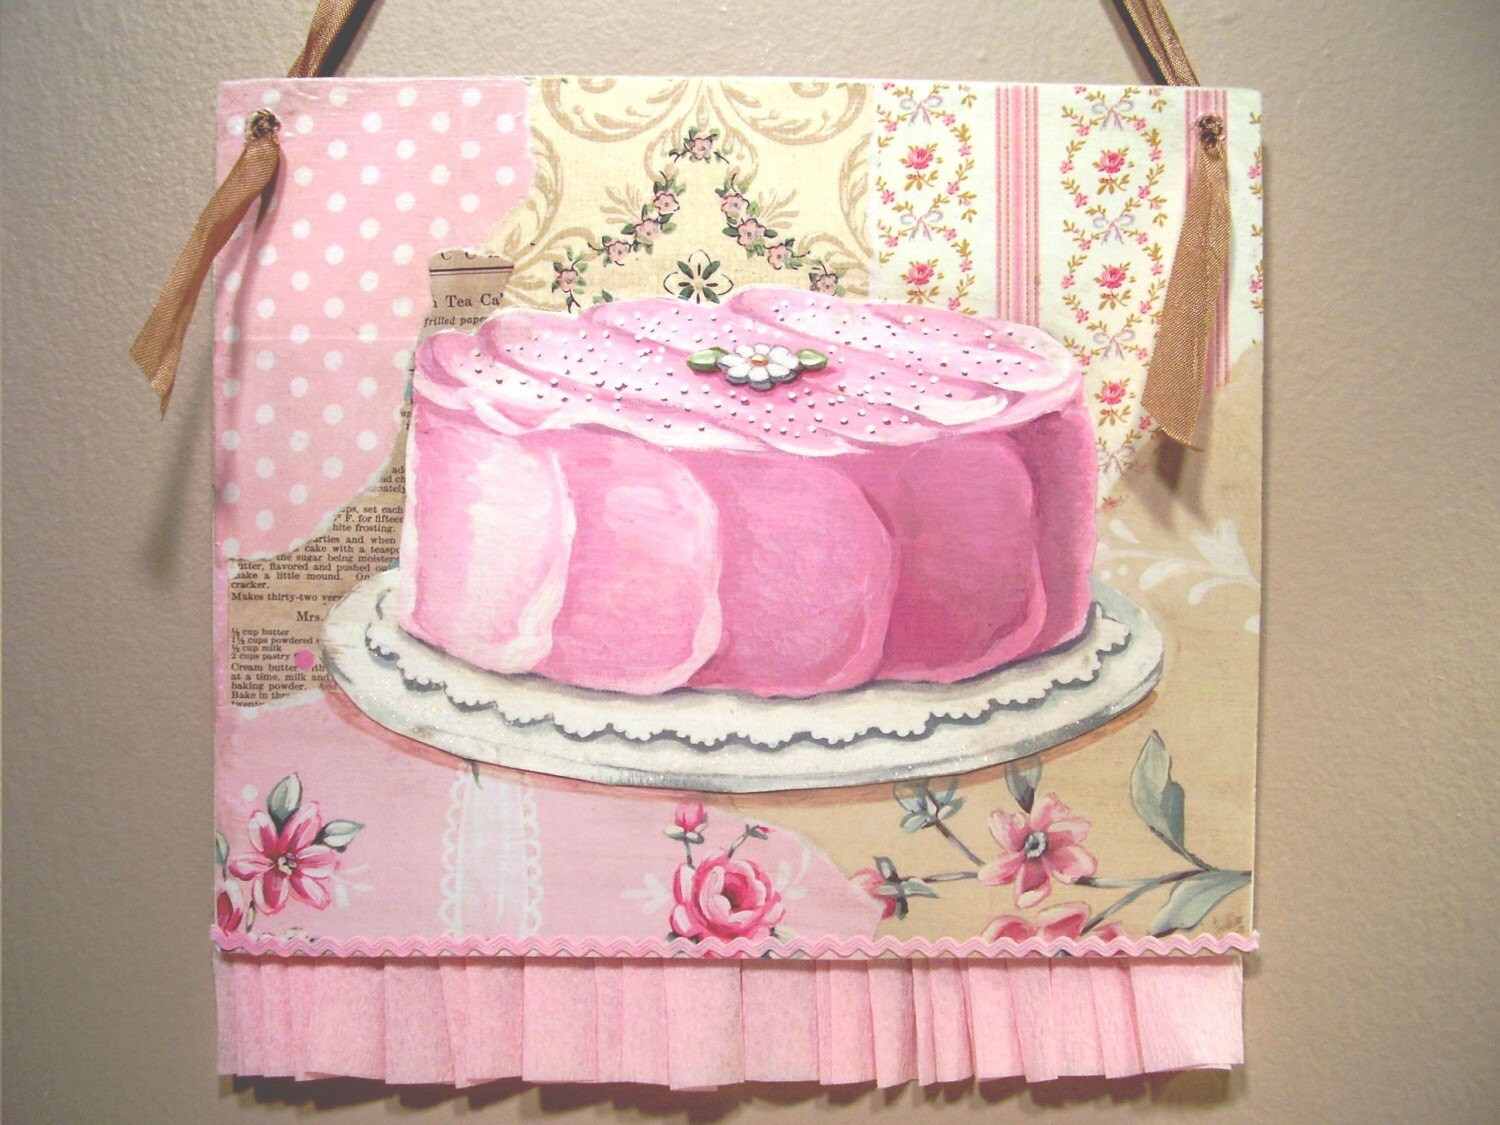 Vintage wallpaper inspired PINK CAKE collage mixed media shabby chic ART 